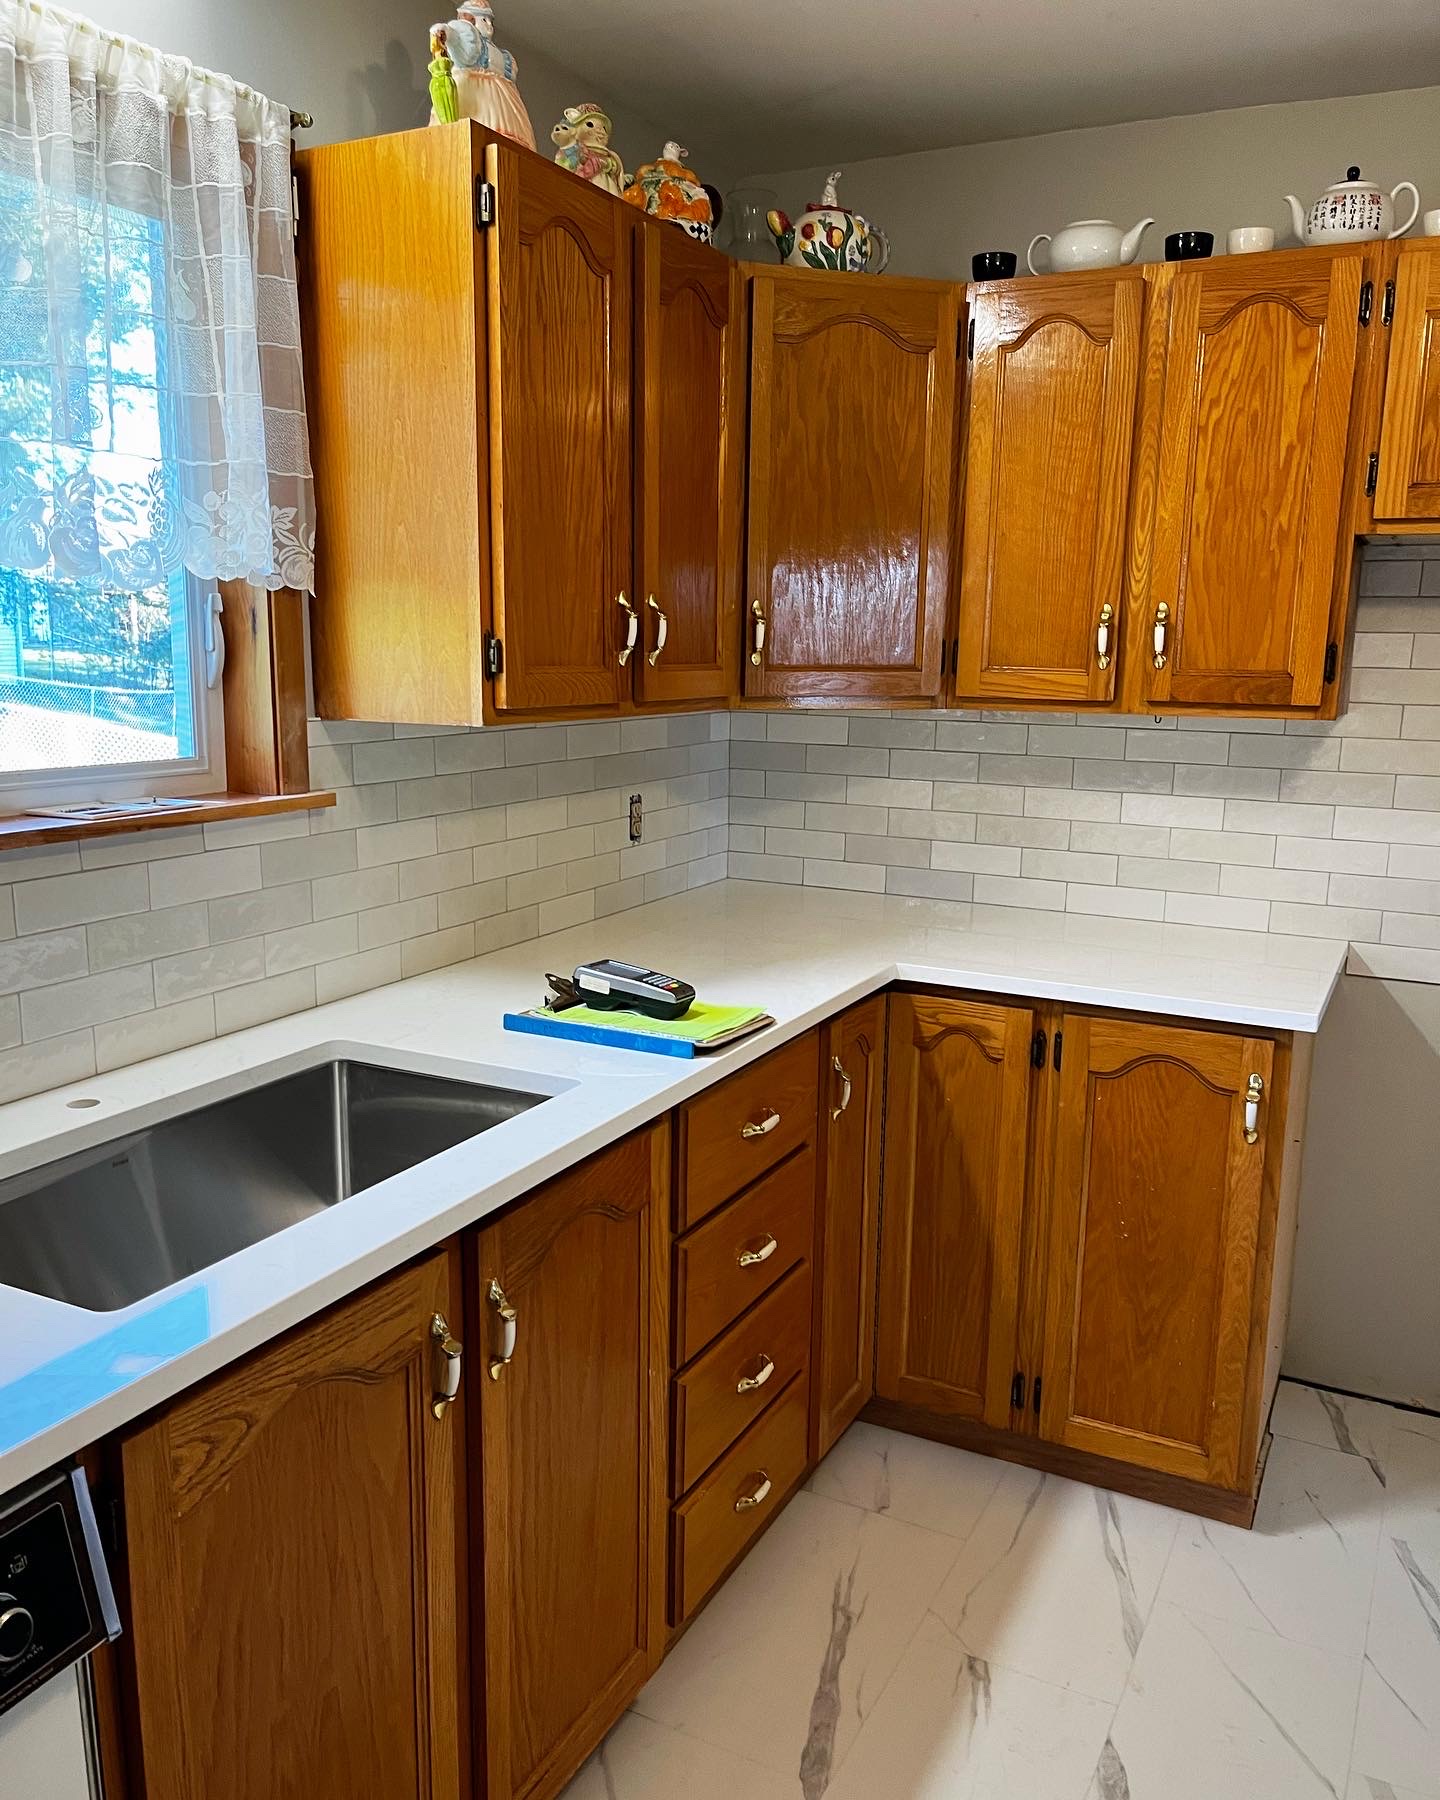 A new Quartz countertop to brighten this classic kitchen look with a subway tile backsplash and undermount sink